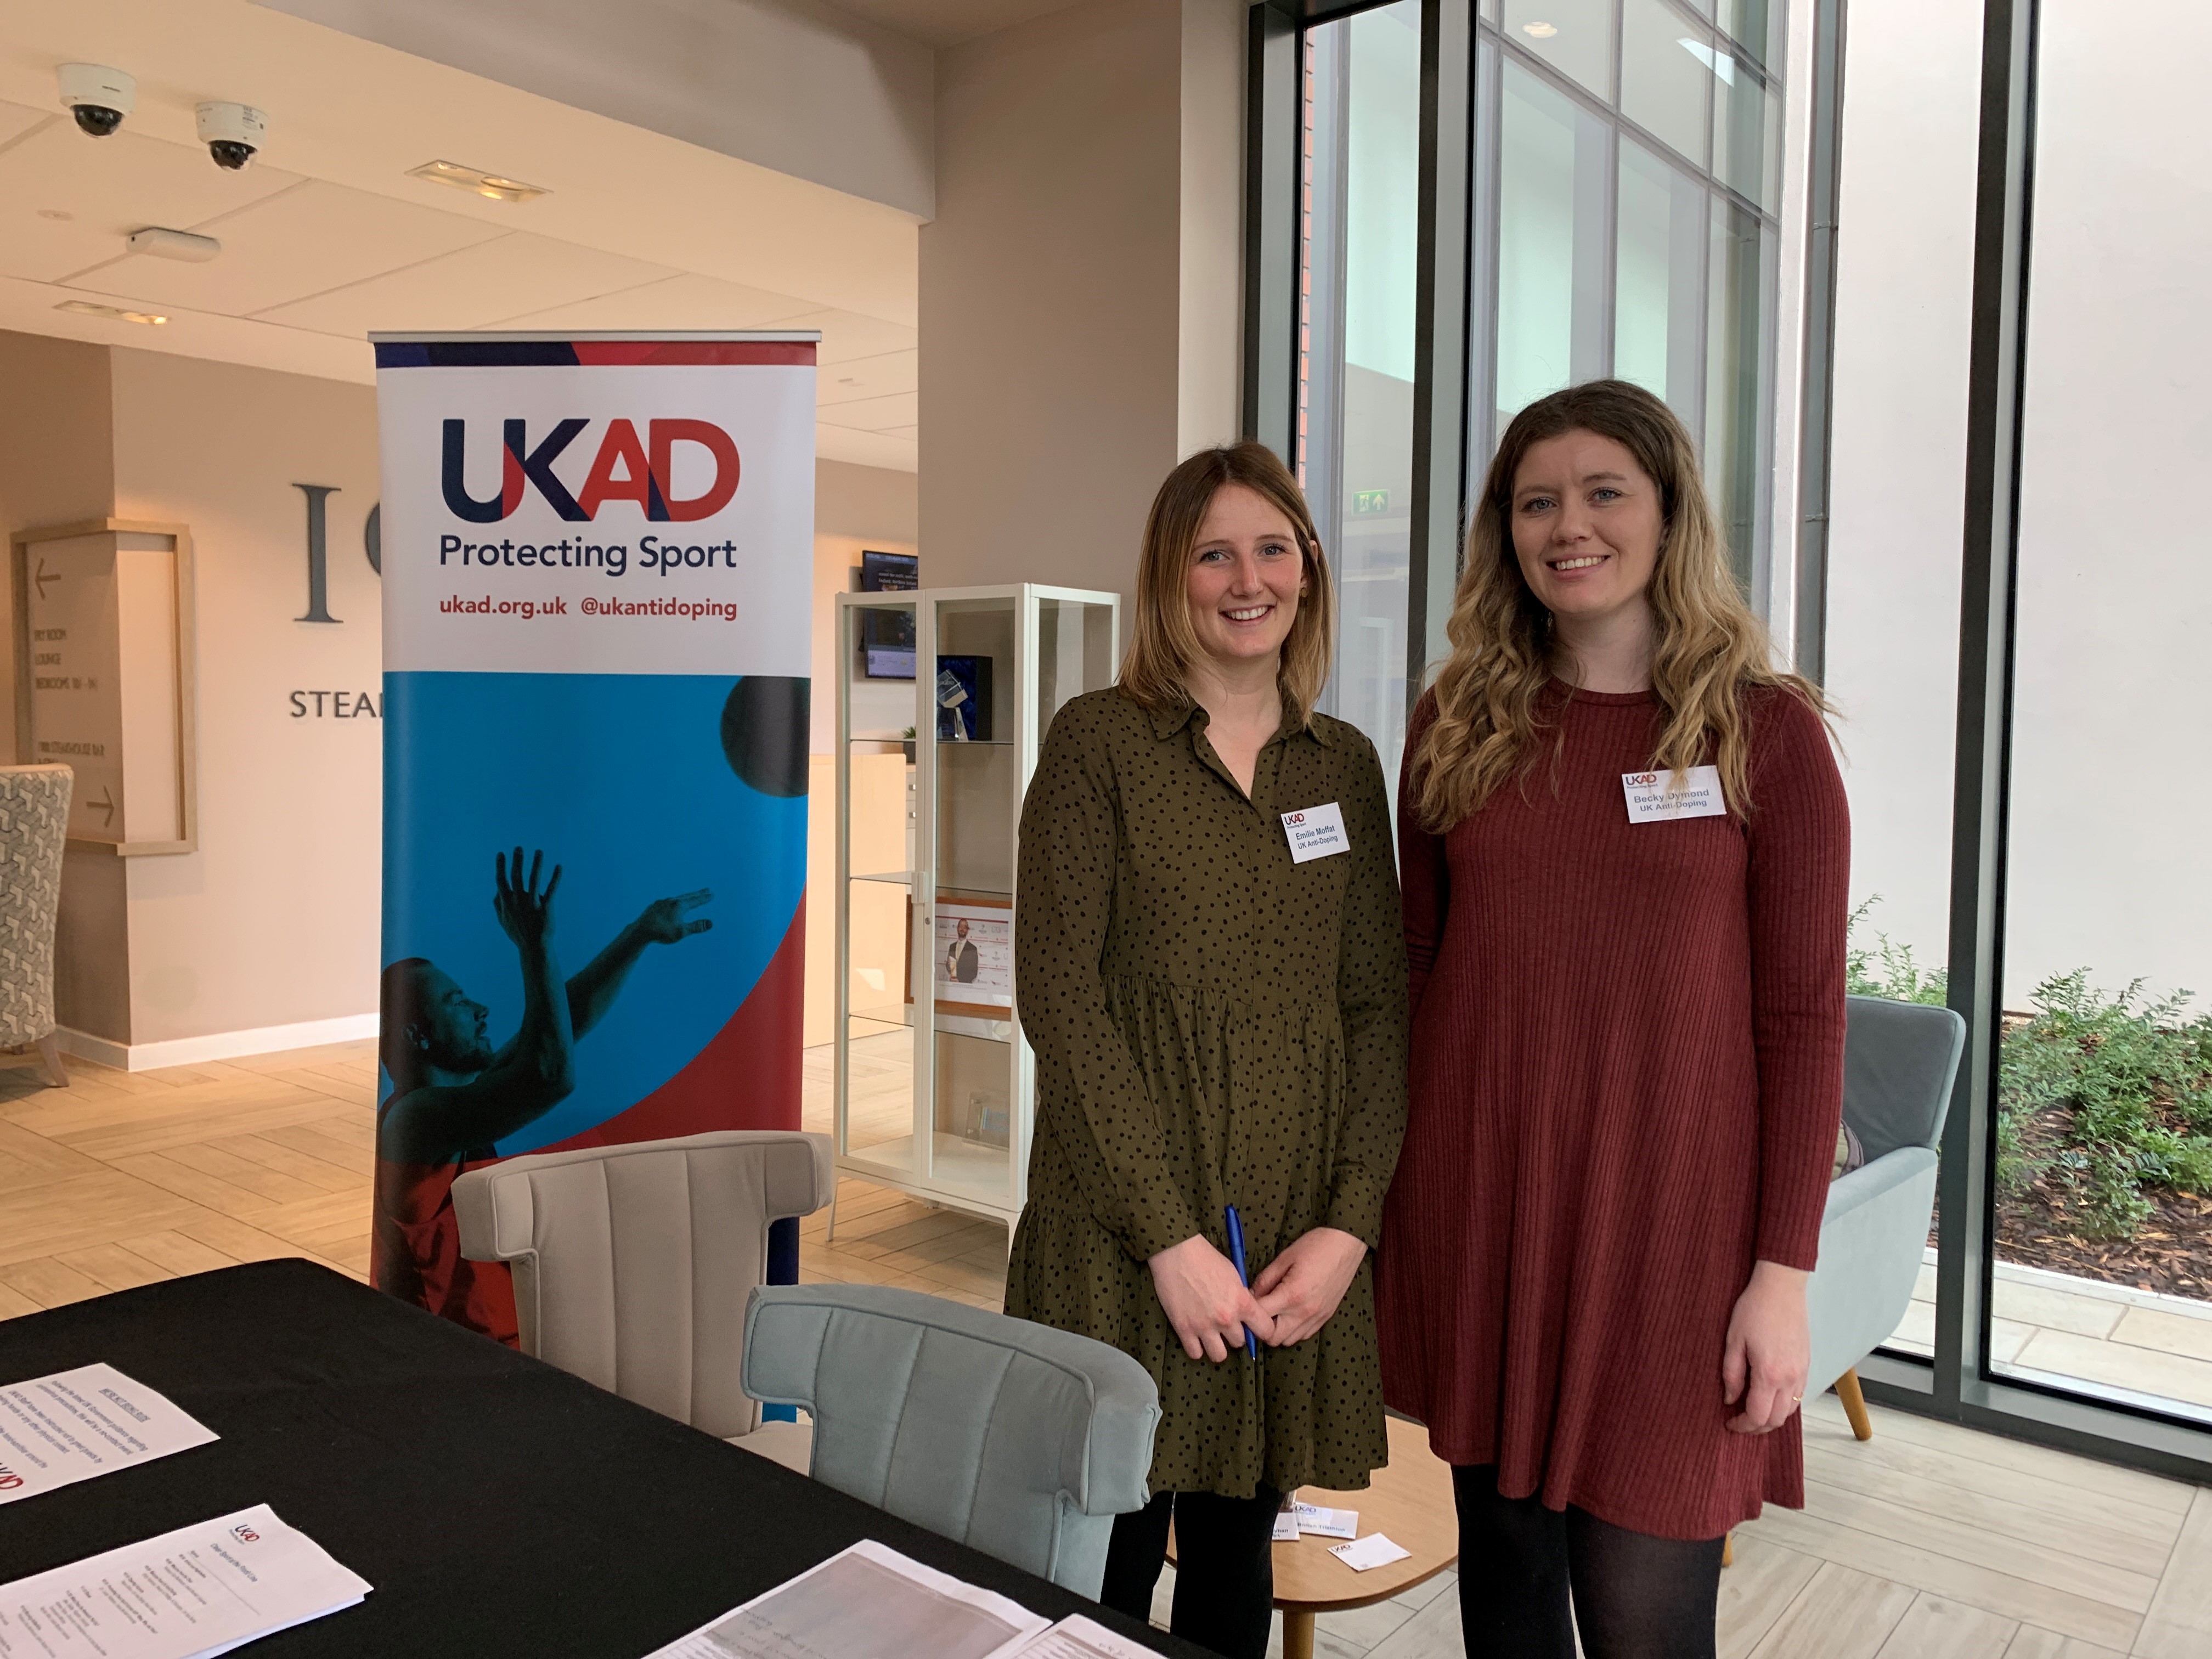 Two event organisers posting for a photo next to UKAD banner